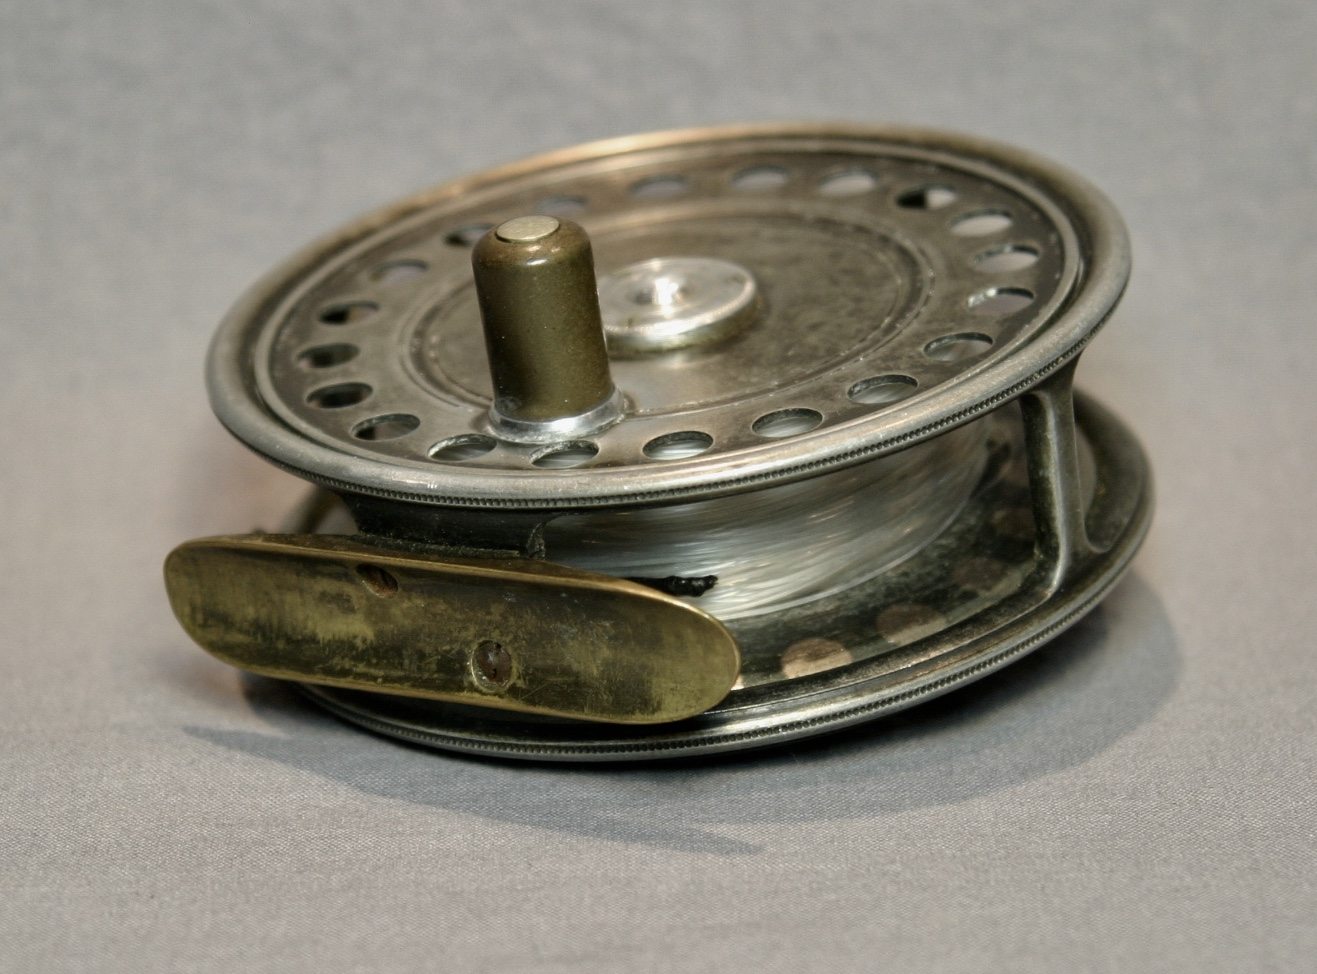 JOHN BRIT PAT N0:658472   3.7/8 FLY REEL Hardy MADE BY HARDY BROS LTD ENGLAND THE ST 